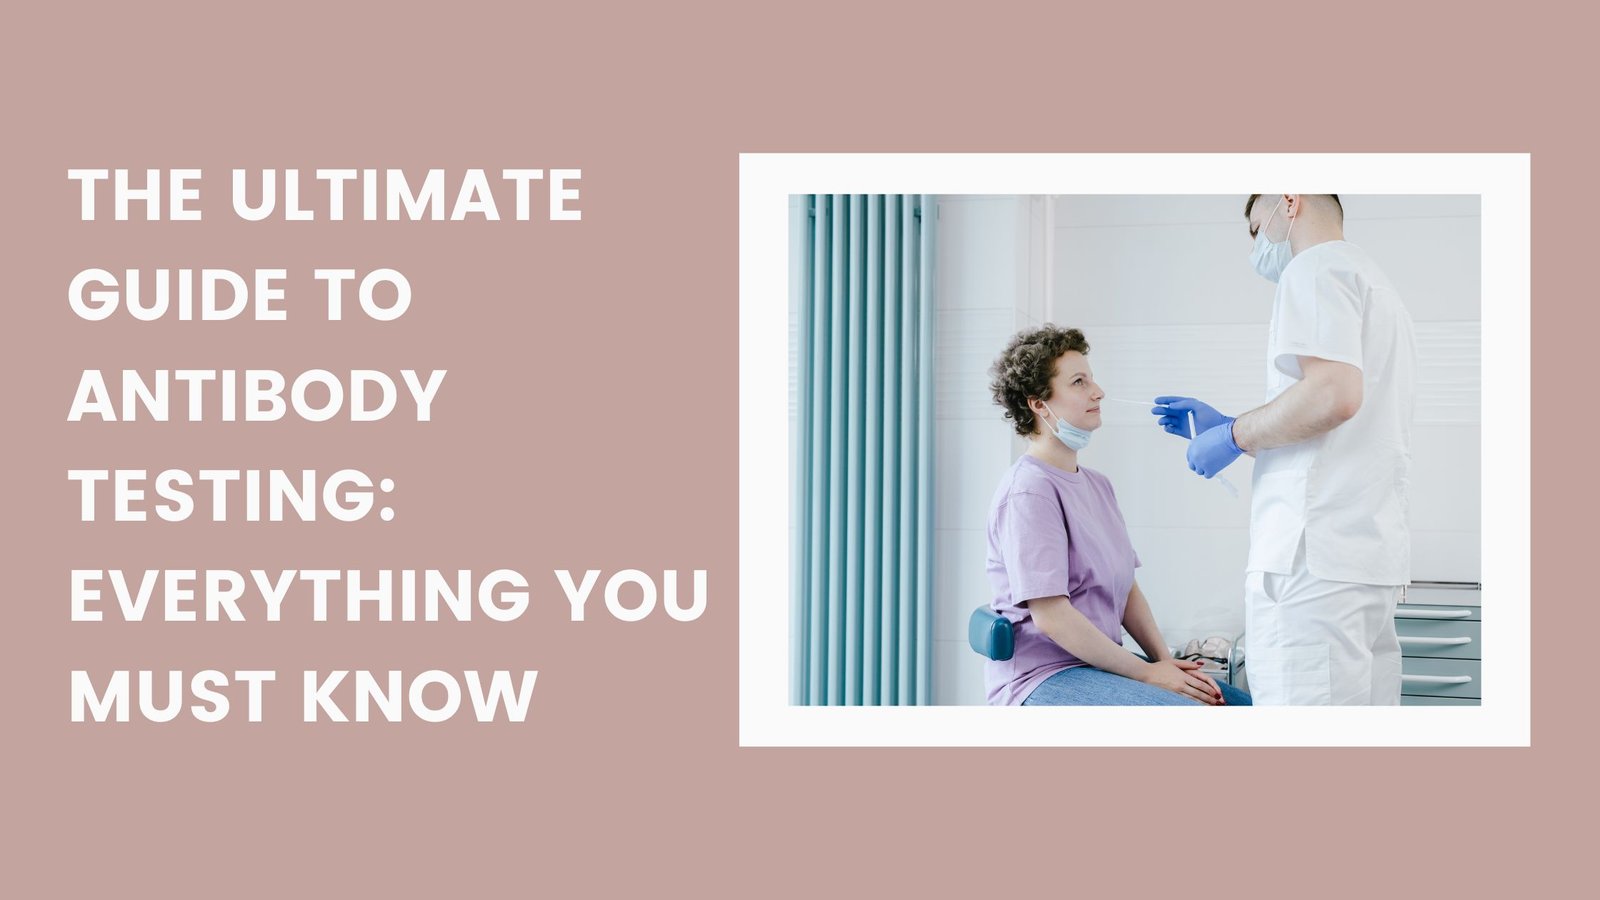 The Ultimate Guide to Antibody Testing: Everything You Must Know